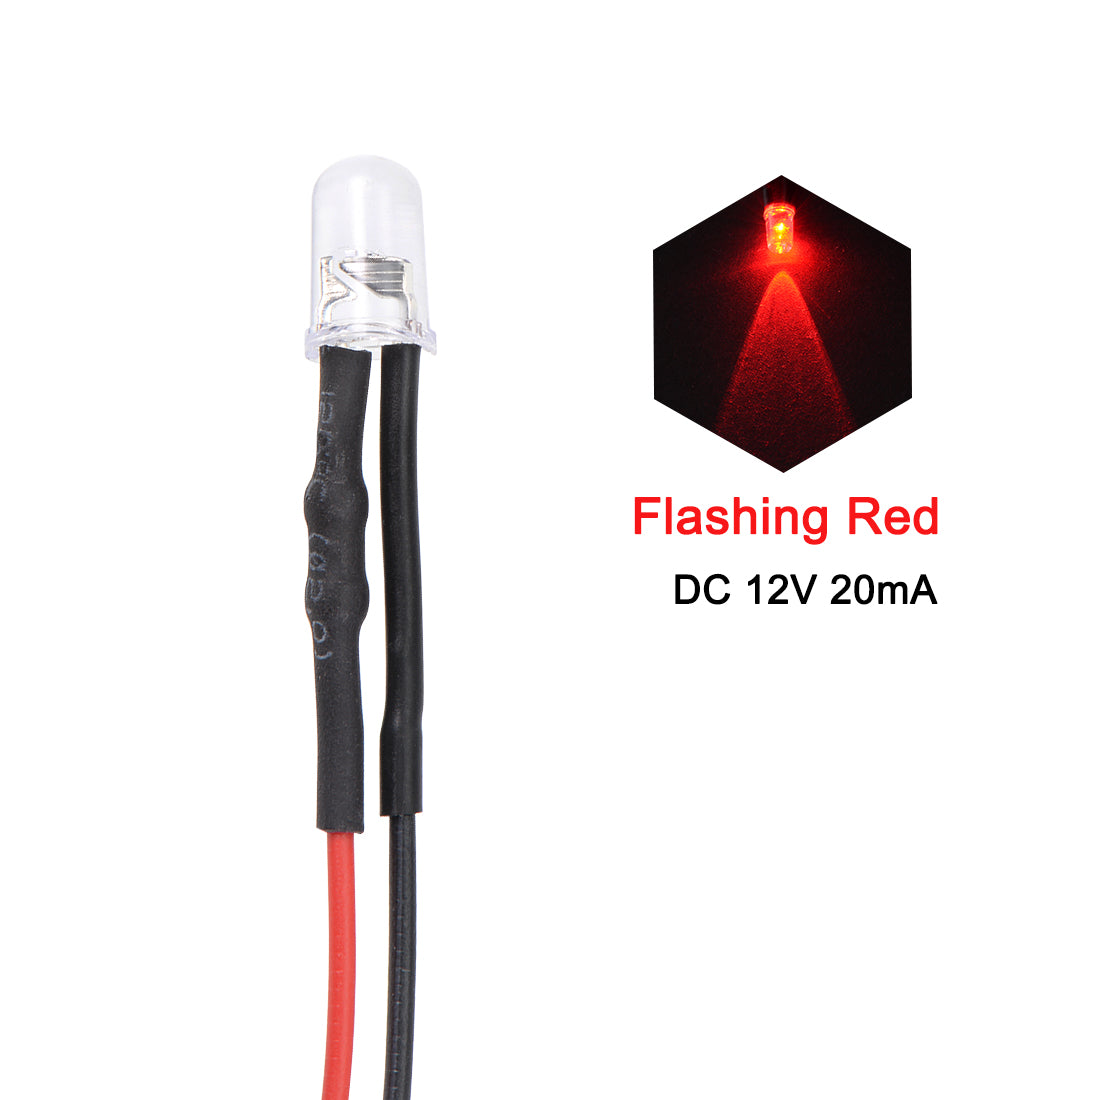 uxcell Uxcell 15Pcs DC 12V 5mm Pre Wired LED, Flashing Red Light Round Top Clear Lens, Light Emitting Diodes with Edge